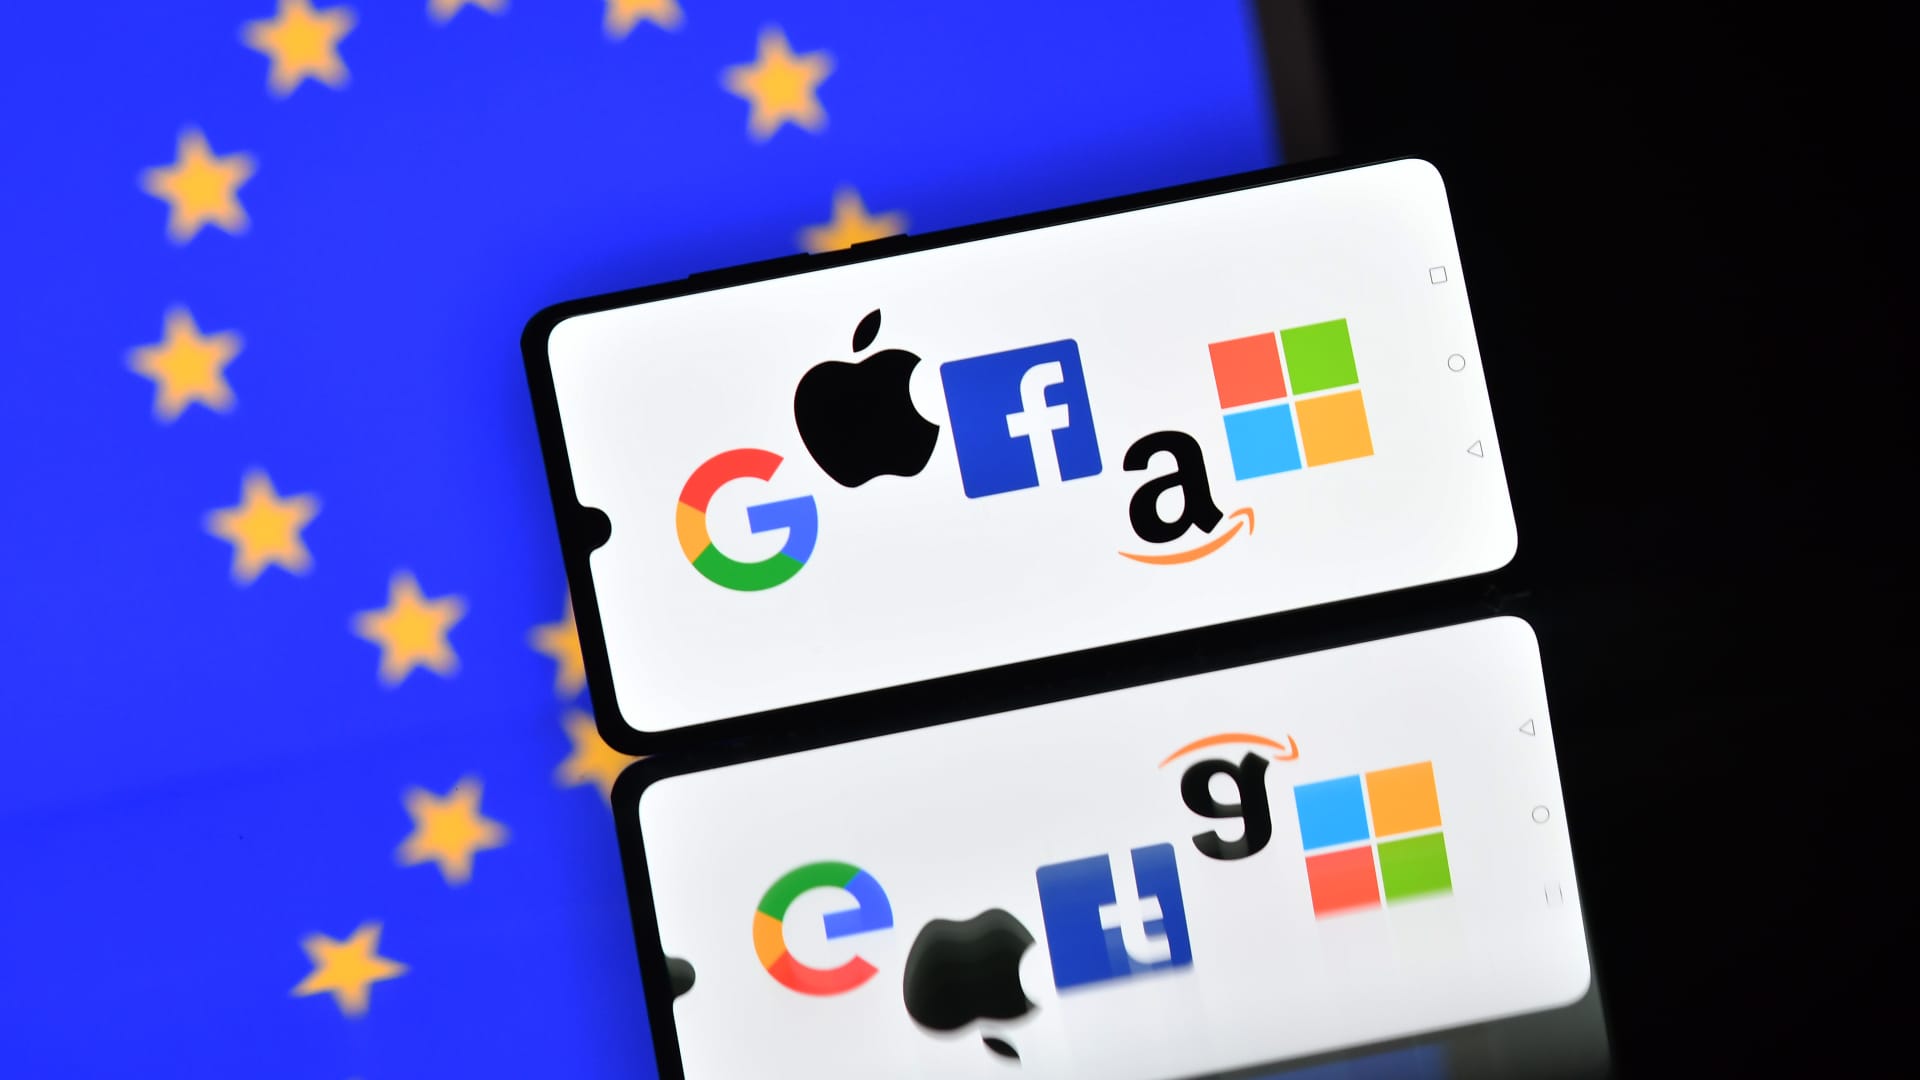 Big Tech goes from 'teenager' to 'grown-up' under landmark EU law. Here's what you need to know